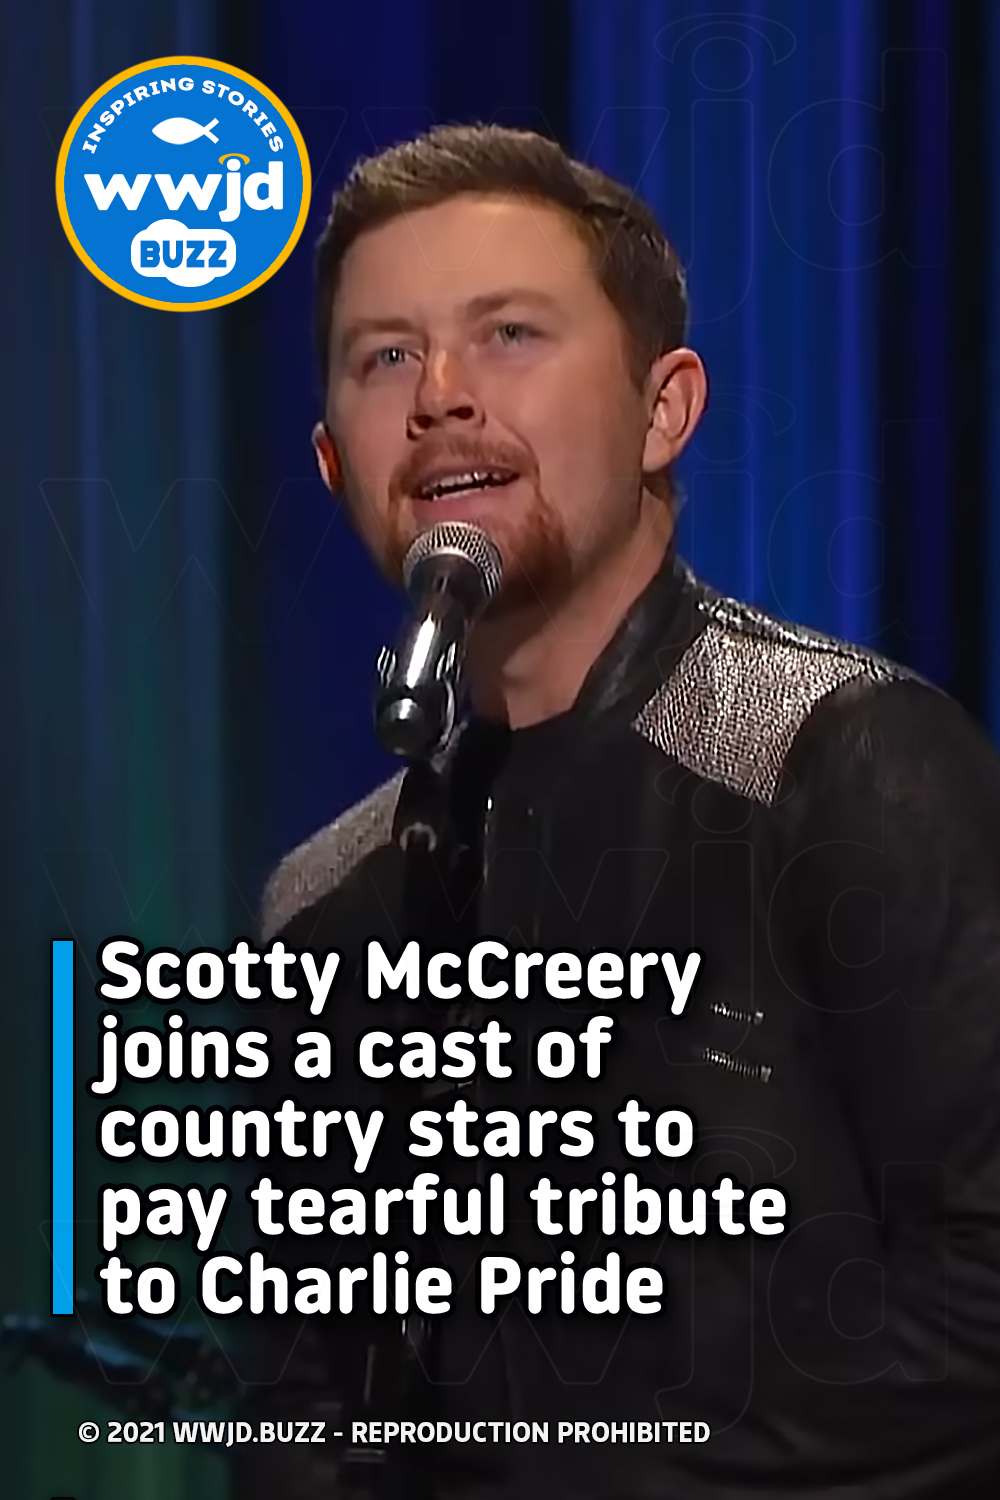 Scotty McCreery joins a cast of country stars to pay tearful tribute to Charlie Pride